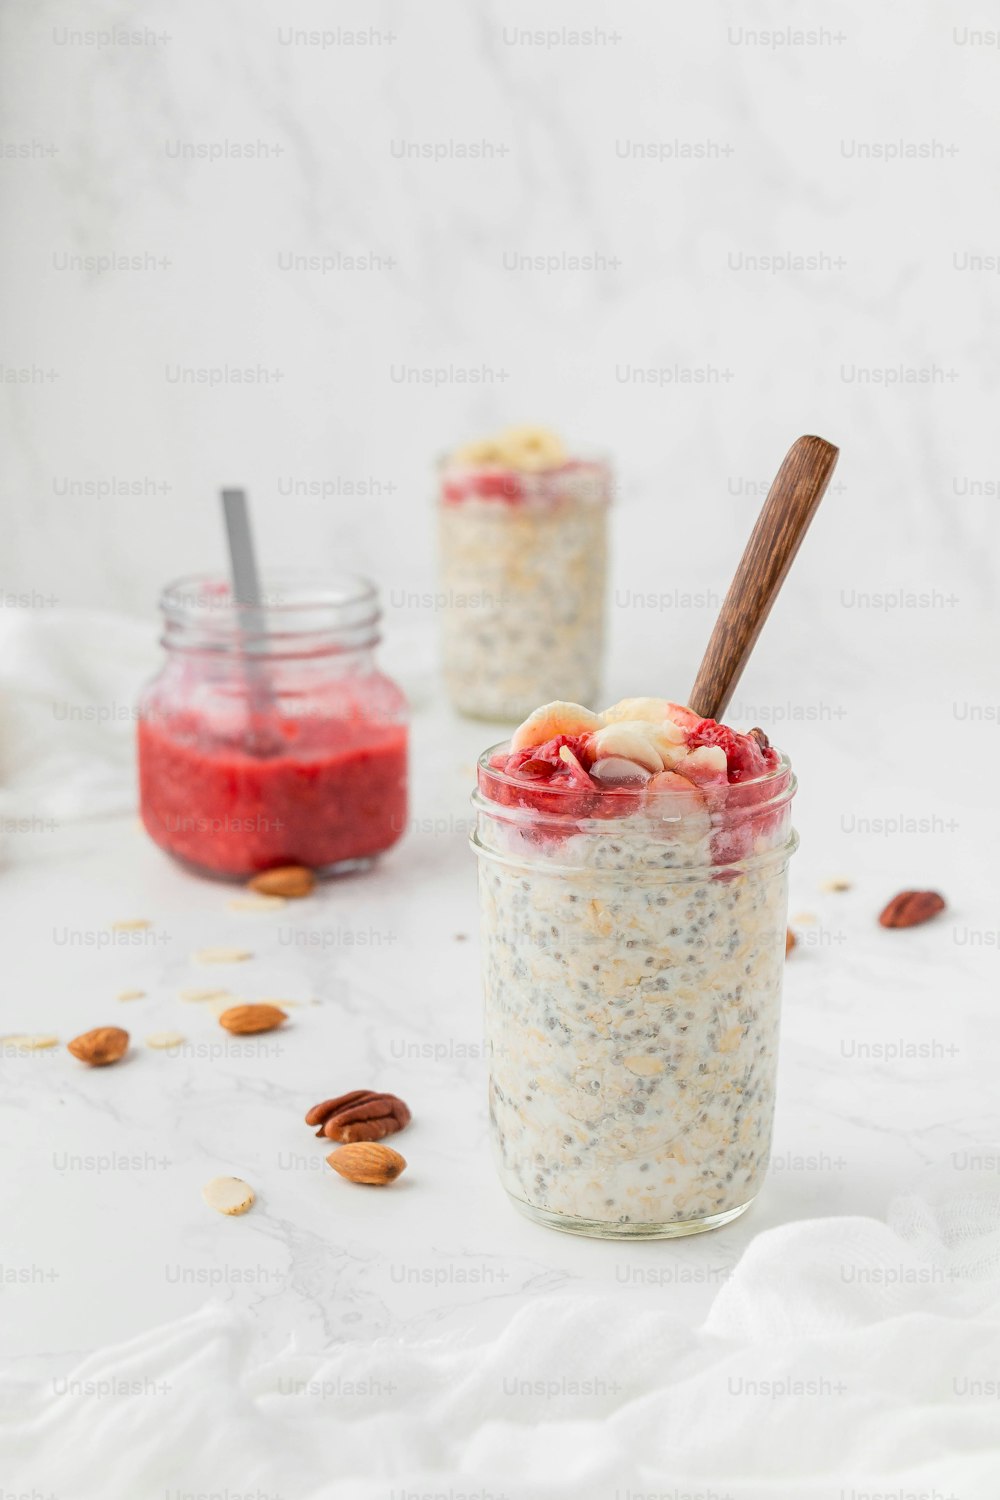 two jars of overnight oatmeal with a wooden spoon